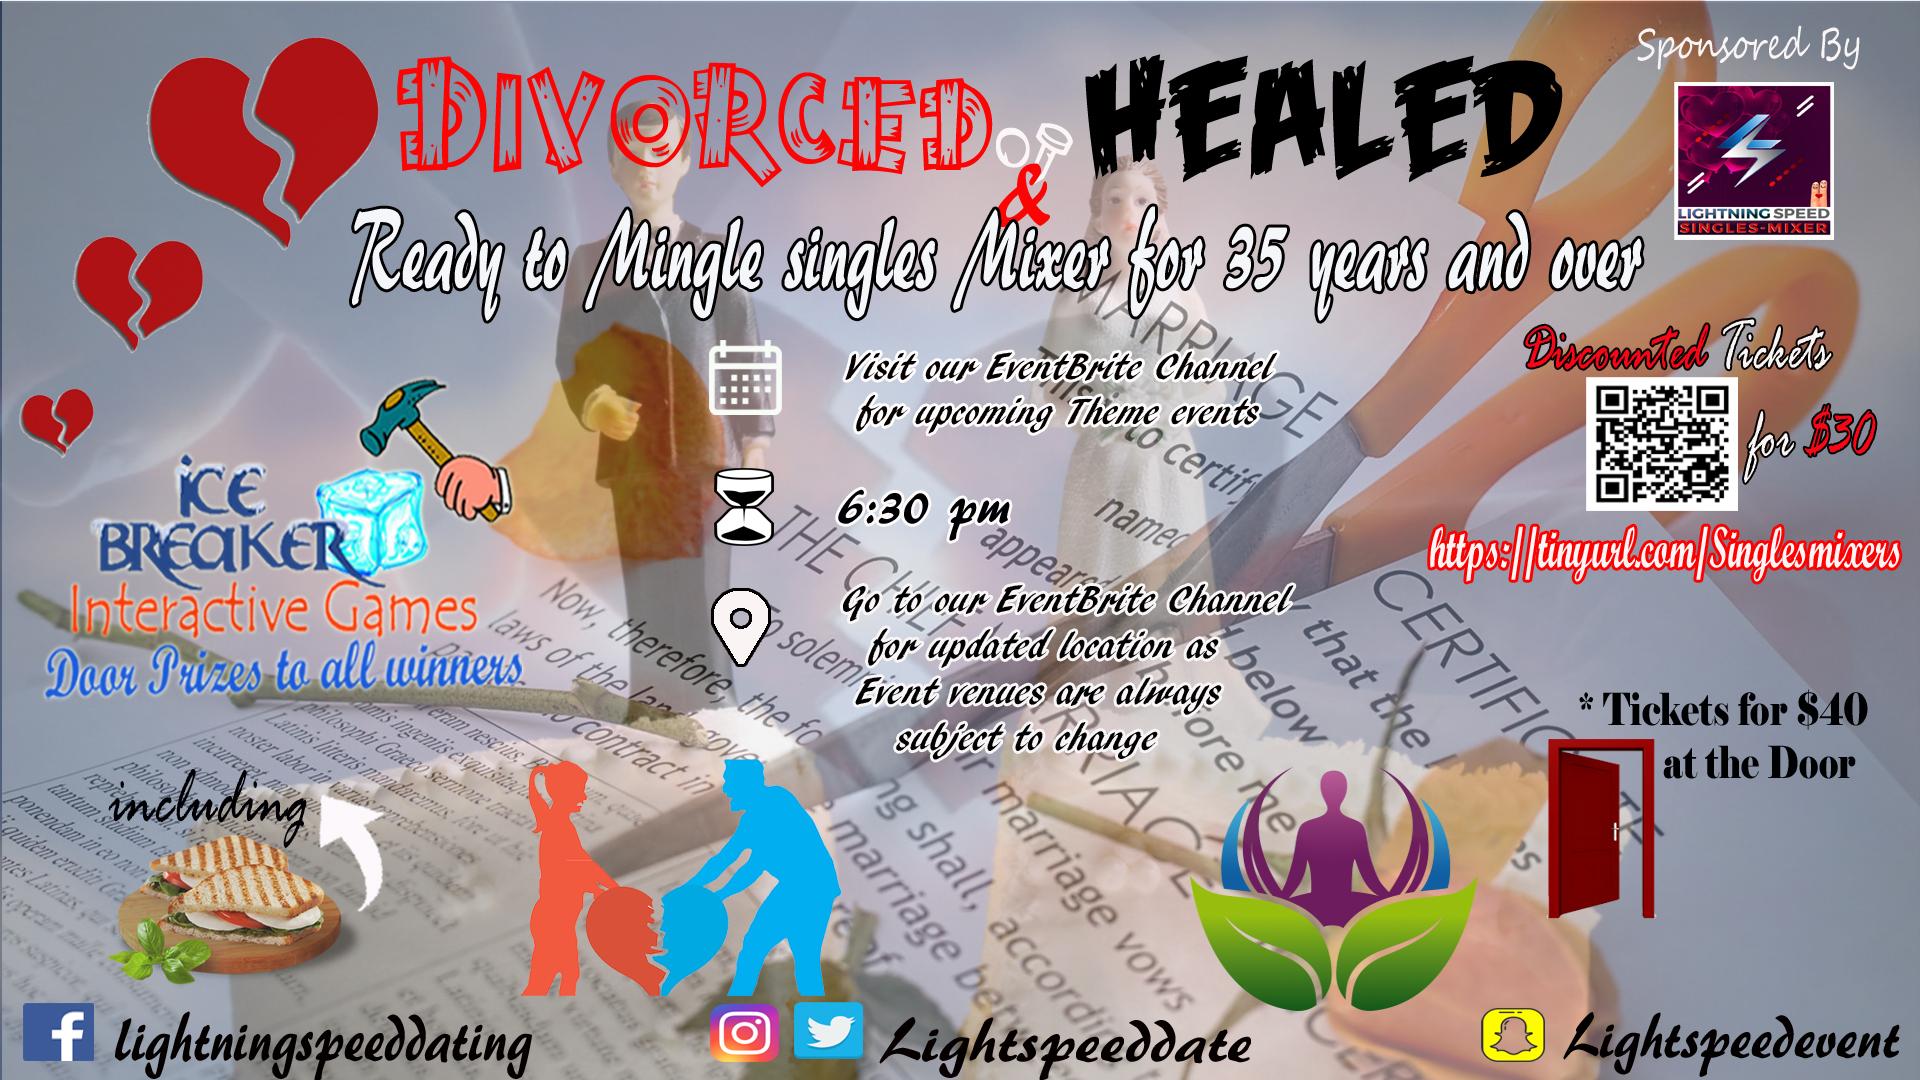 Divorced, Healed and Ready 2 Mingle Singles Mixer for ALL 35 & Over group